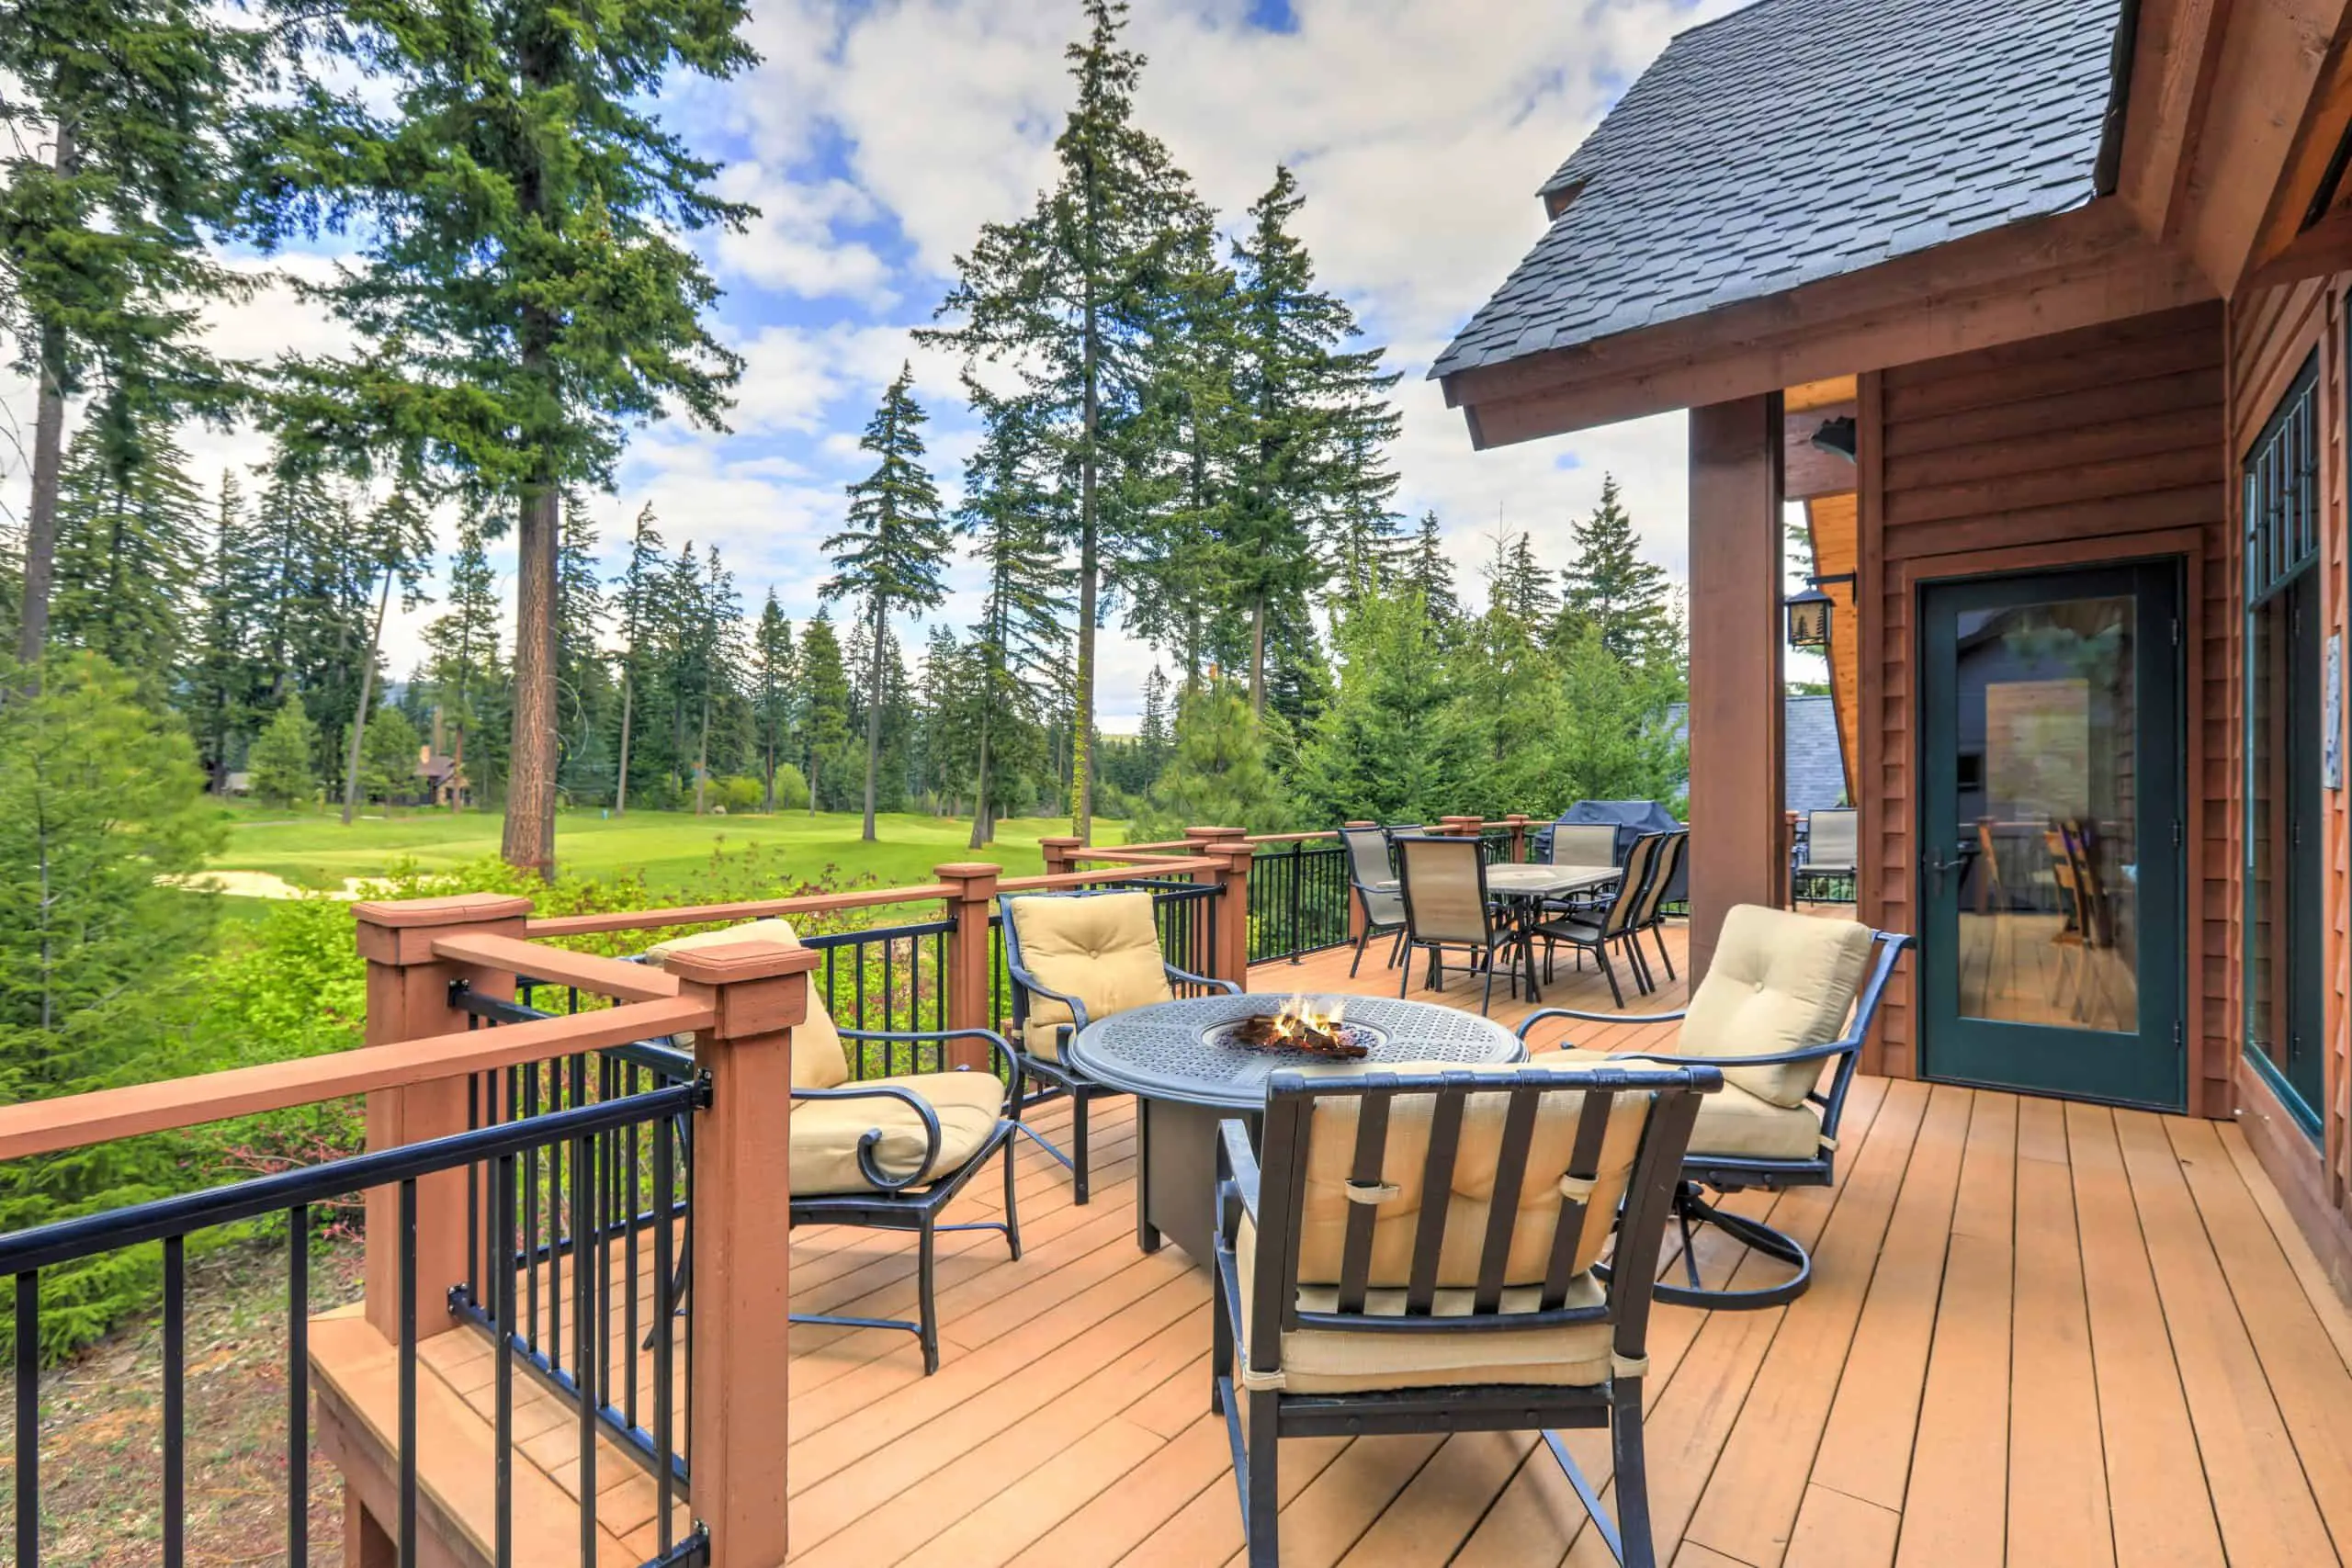 Beautiful large cabin home with large wooden deck and chairs with table overlooking golf course.